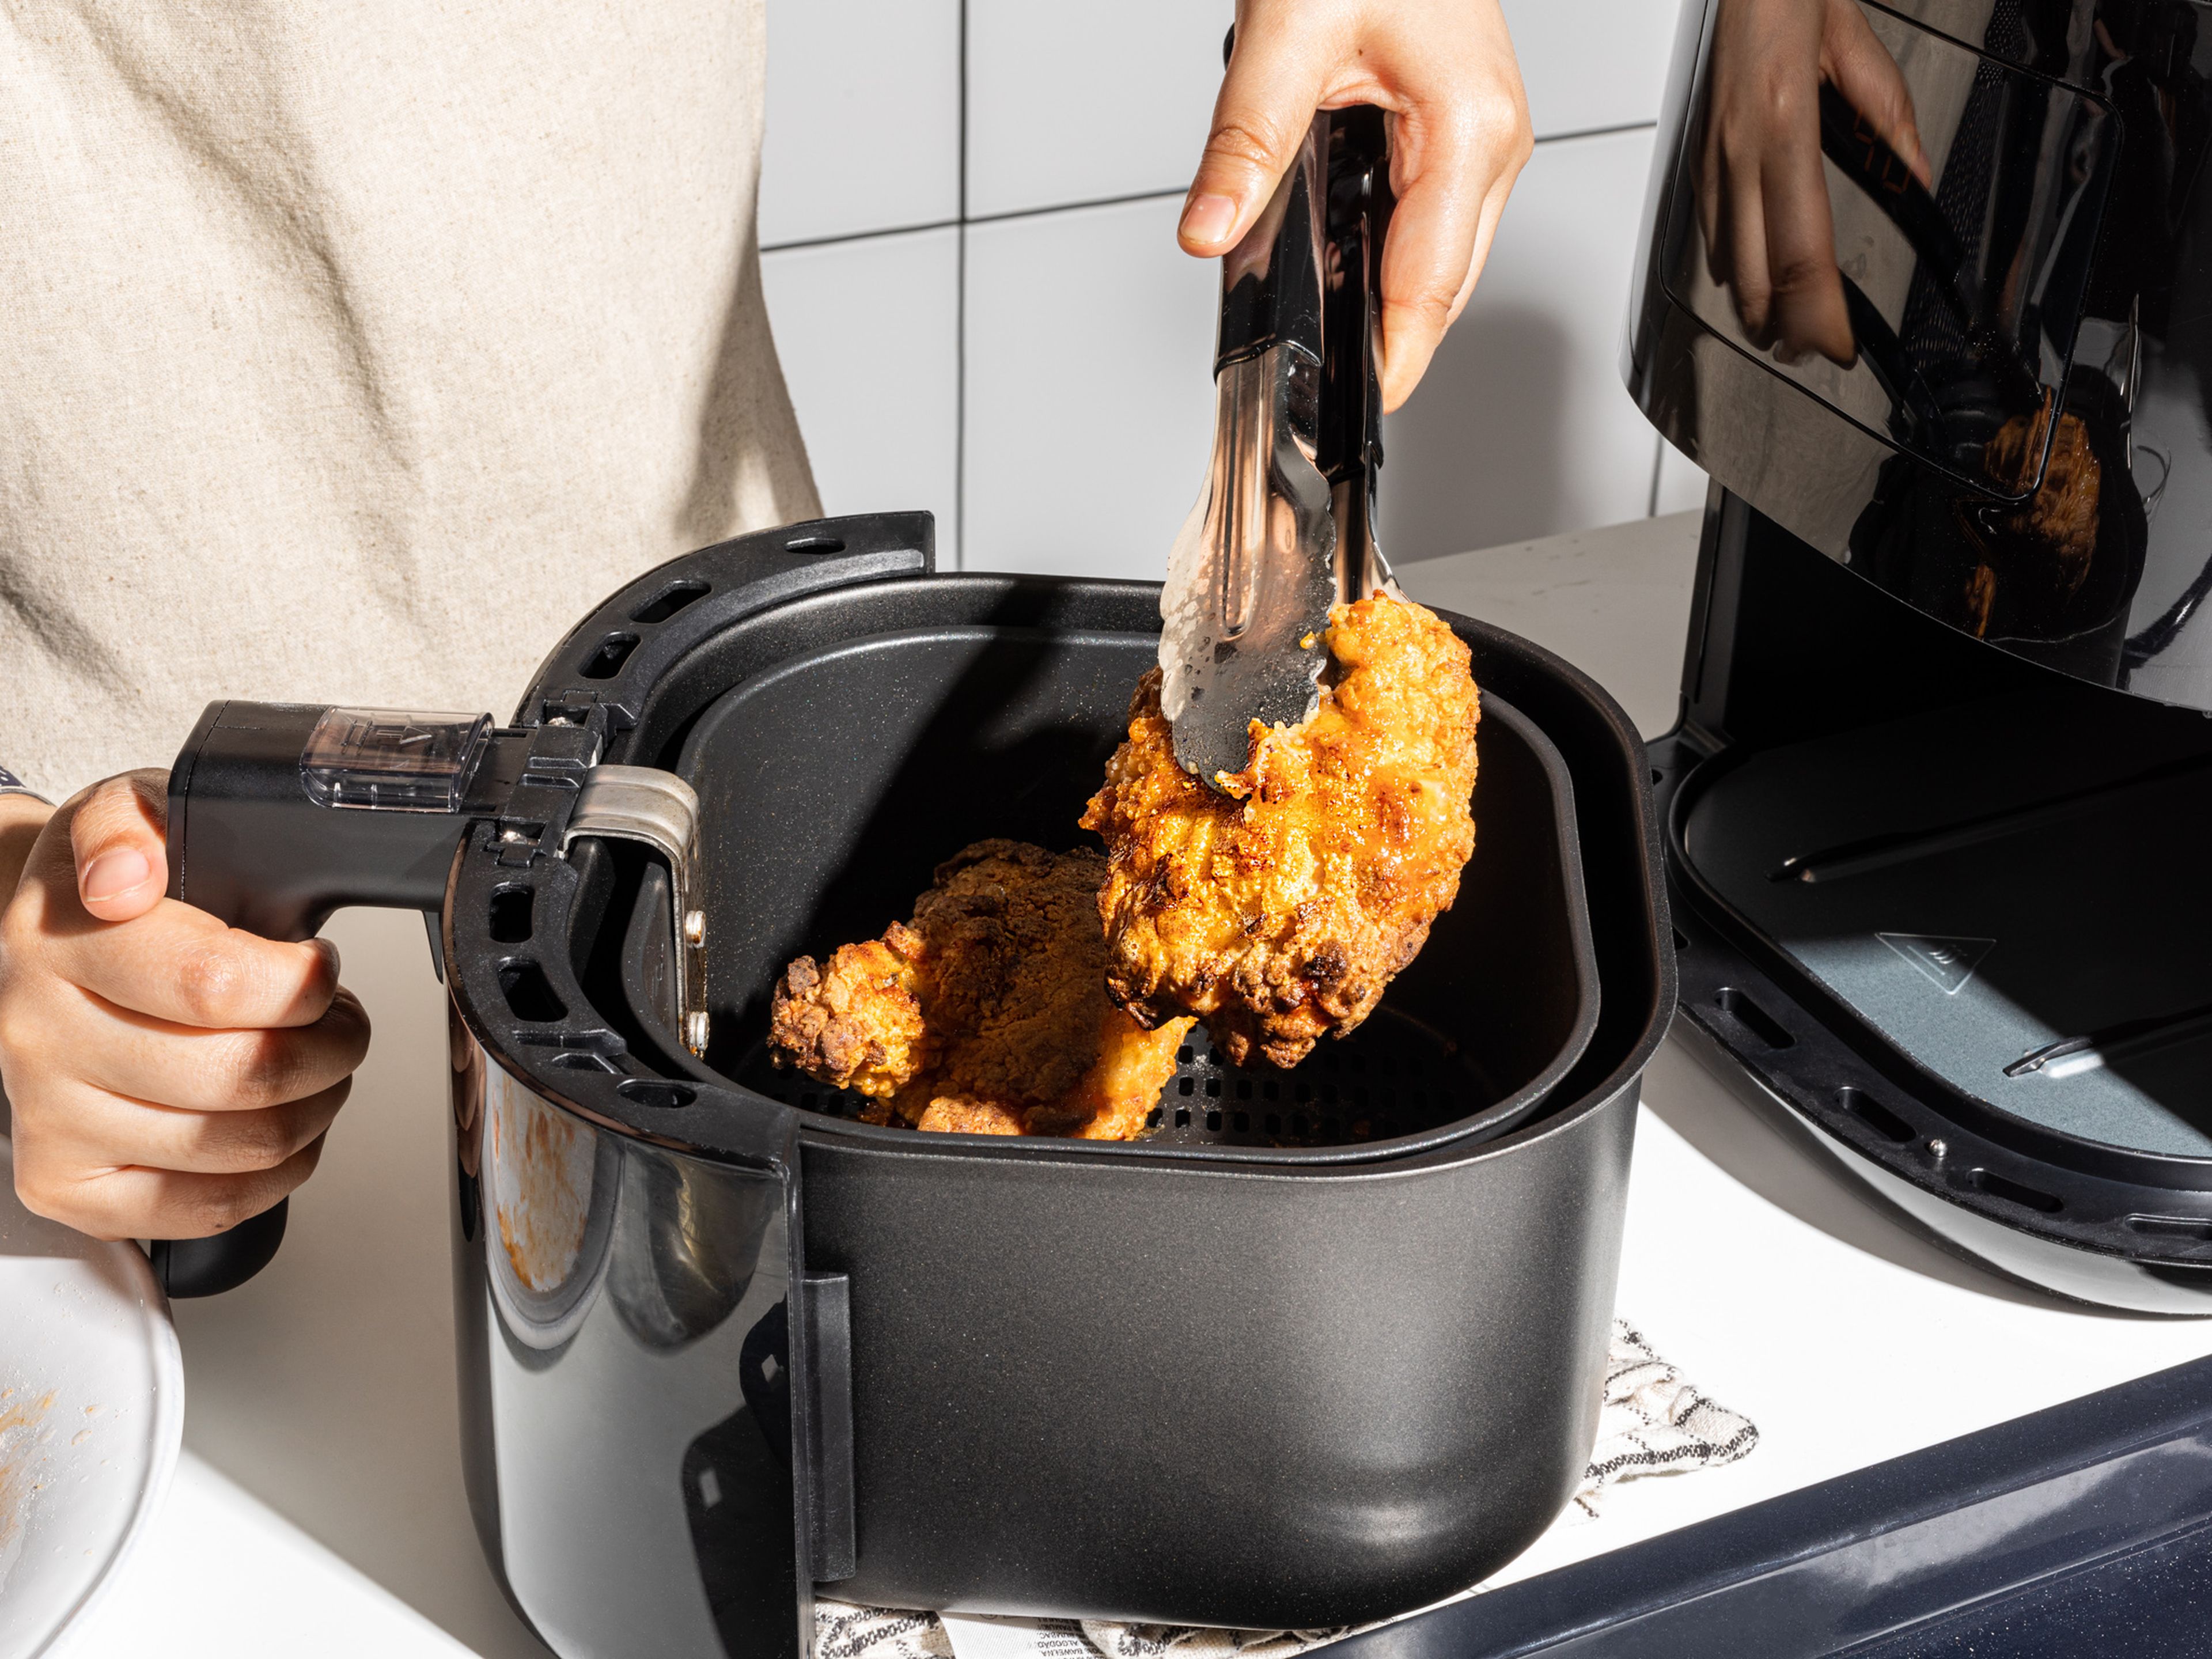 For the air fryer chicken, heat up the air fryer to 200°C/400°F or to your air-fryer’s recommended heat setting for chicken (if it has one). Cook in batches, according to the size of your air fryer, for approx. 20 min. Halfway through the frying time, flip the chicken pieces and brush with more oil. Place cooked pieces onto a rack.